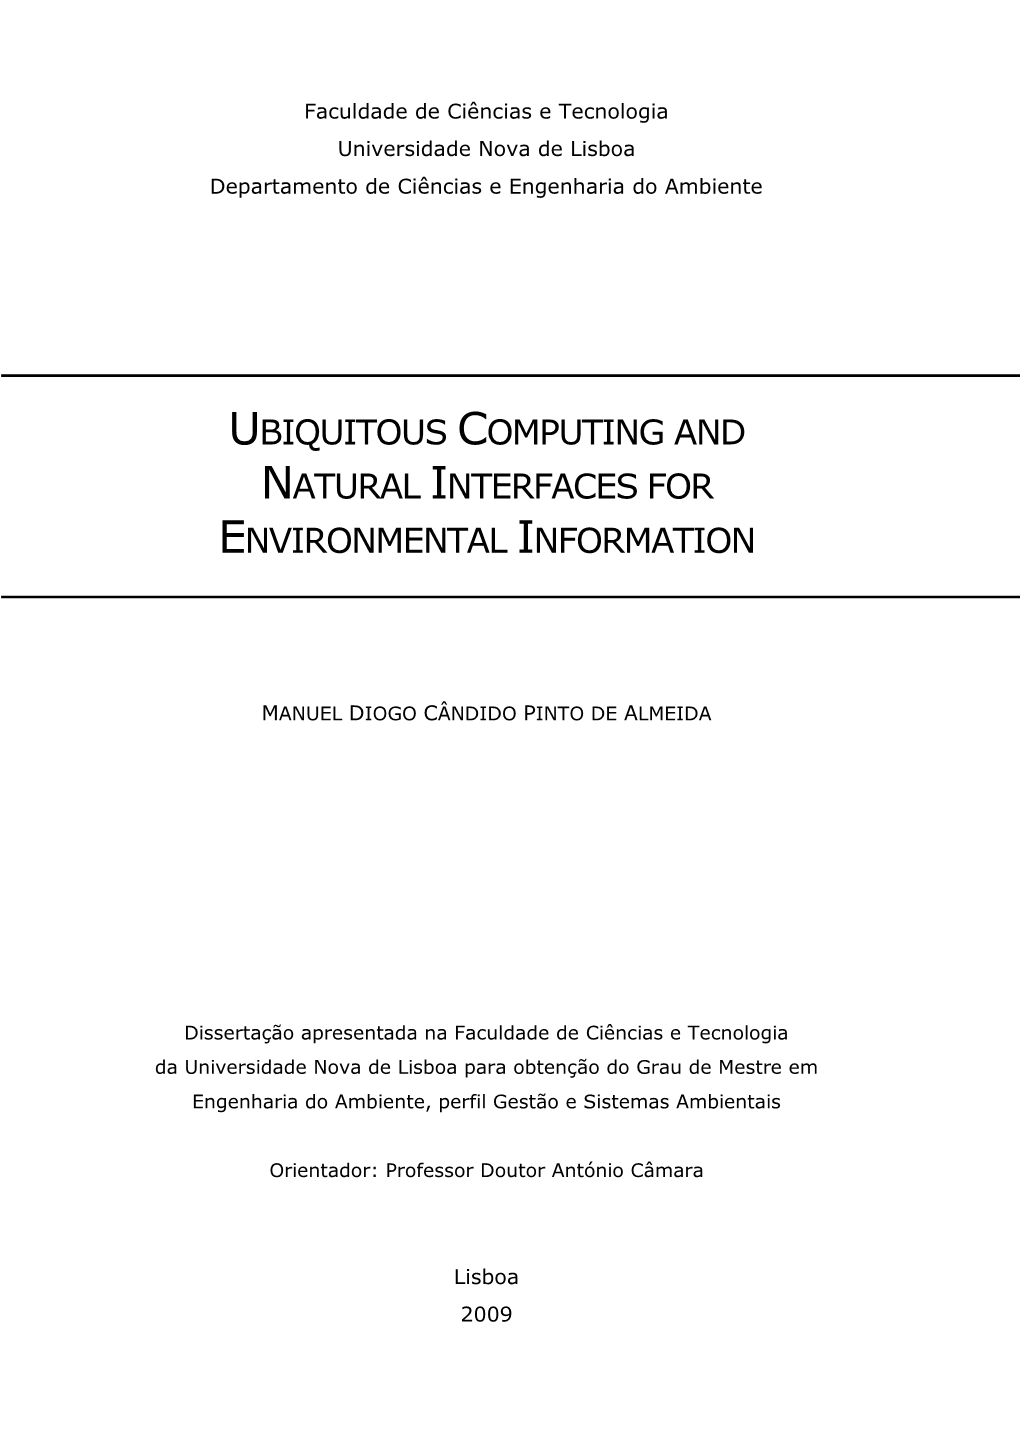 Ubiquitous Computing and Natural Interfaces for Environmental Information